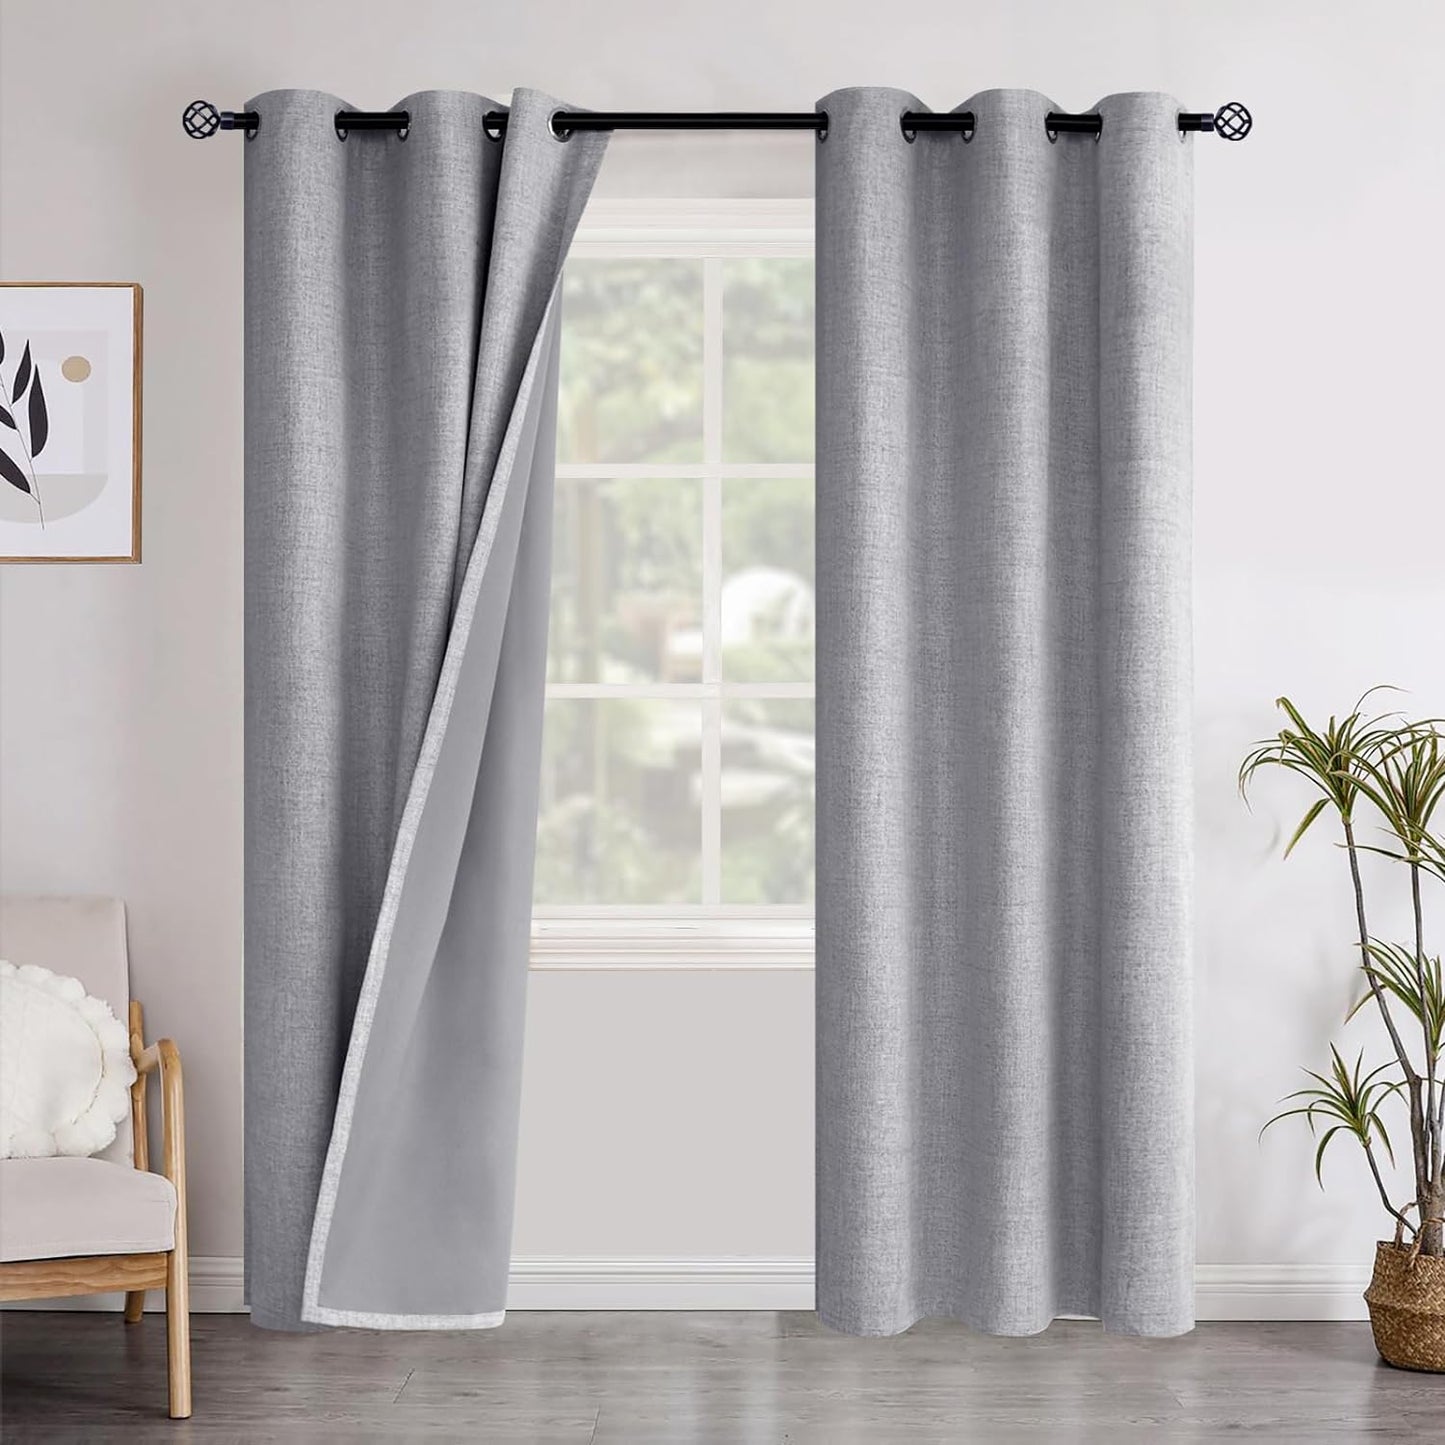 Youngstex Linen Blackout Curtains 63 Inch Length, Grommet Darkening Bedroom Curtains Burlap Linen Window Drapes Thermal Insulated for Basement Summer Heat, 2 Panels, 52 X 63 Inch, Beige  YoungsTex Grey 42W X 84L 